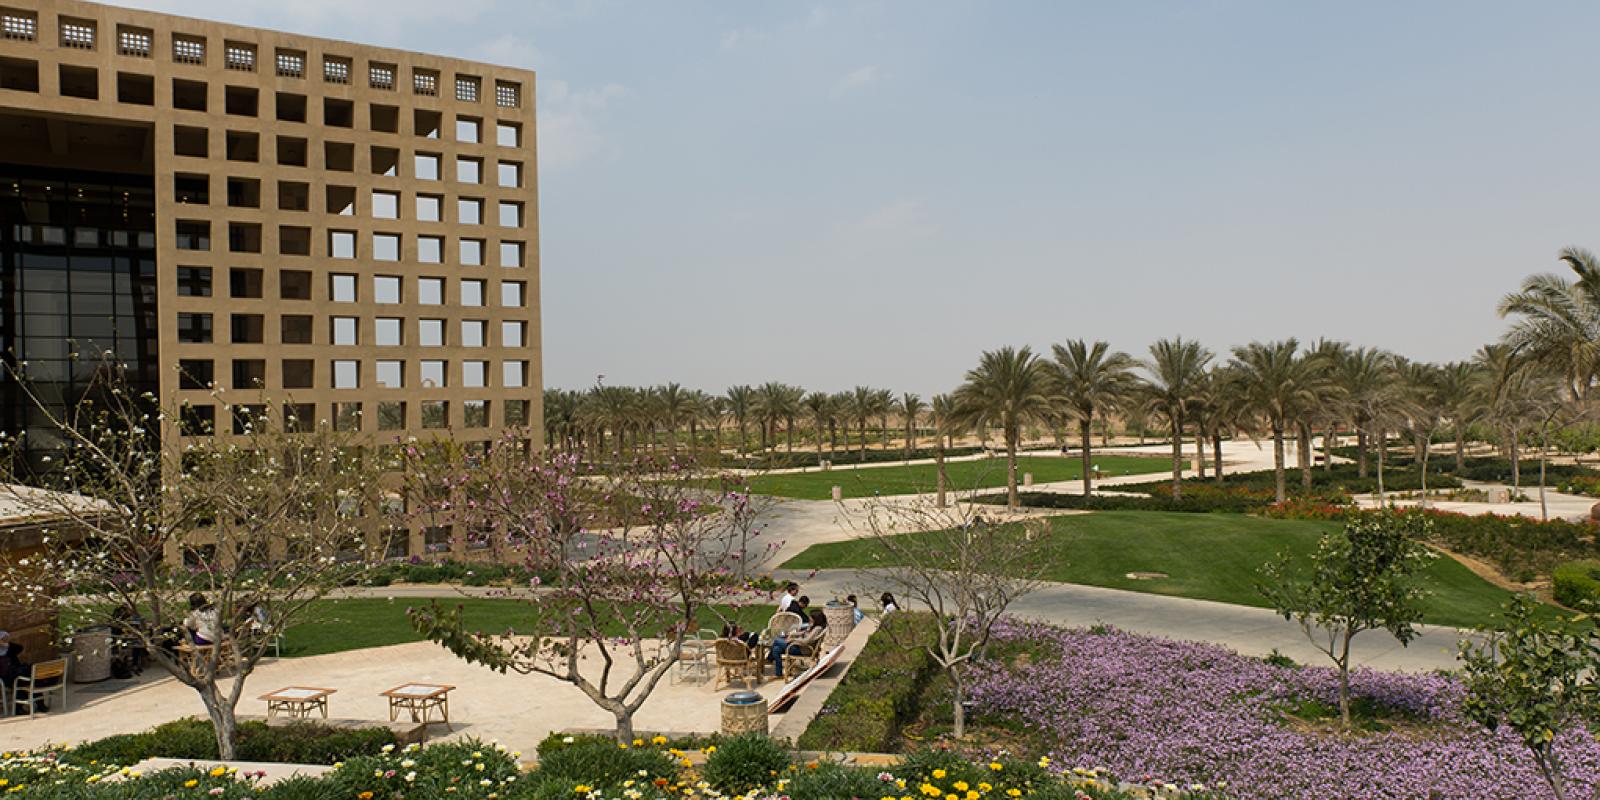 For the fifth consecutive year, AUC is one of the top 3 to 5 percent of higher education institutions worldwide that are included in global rankings